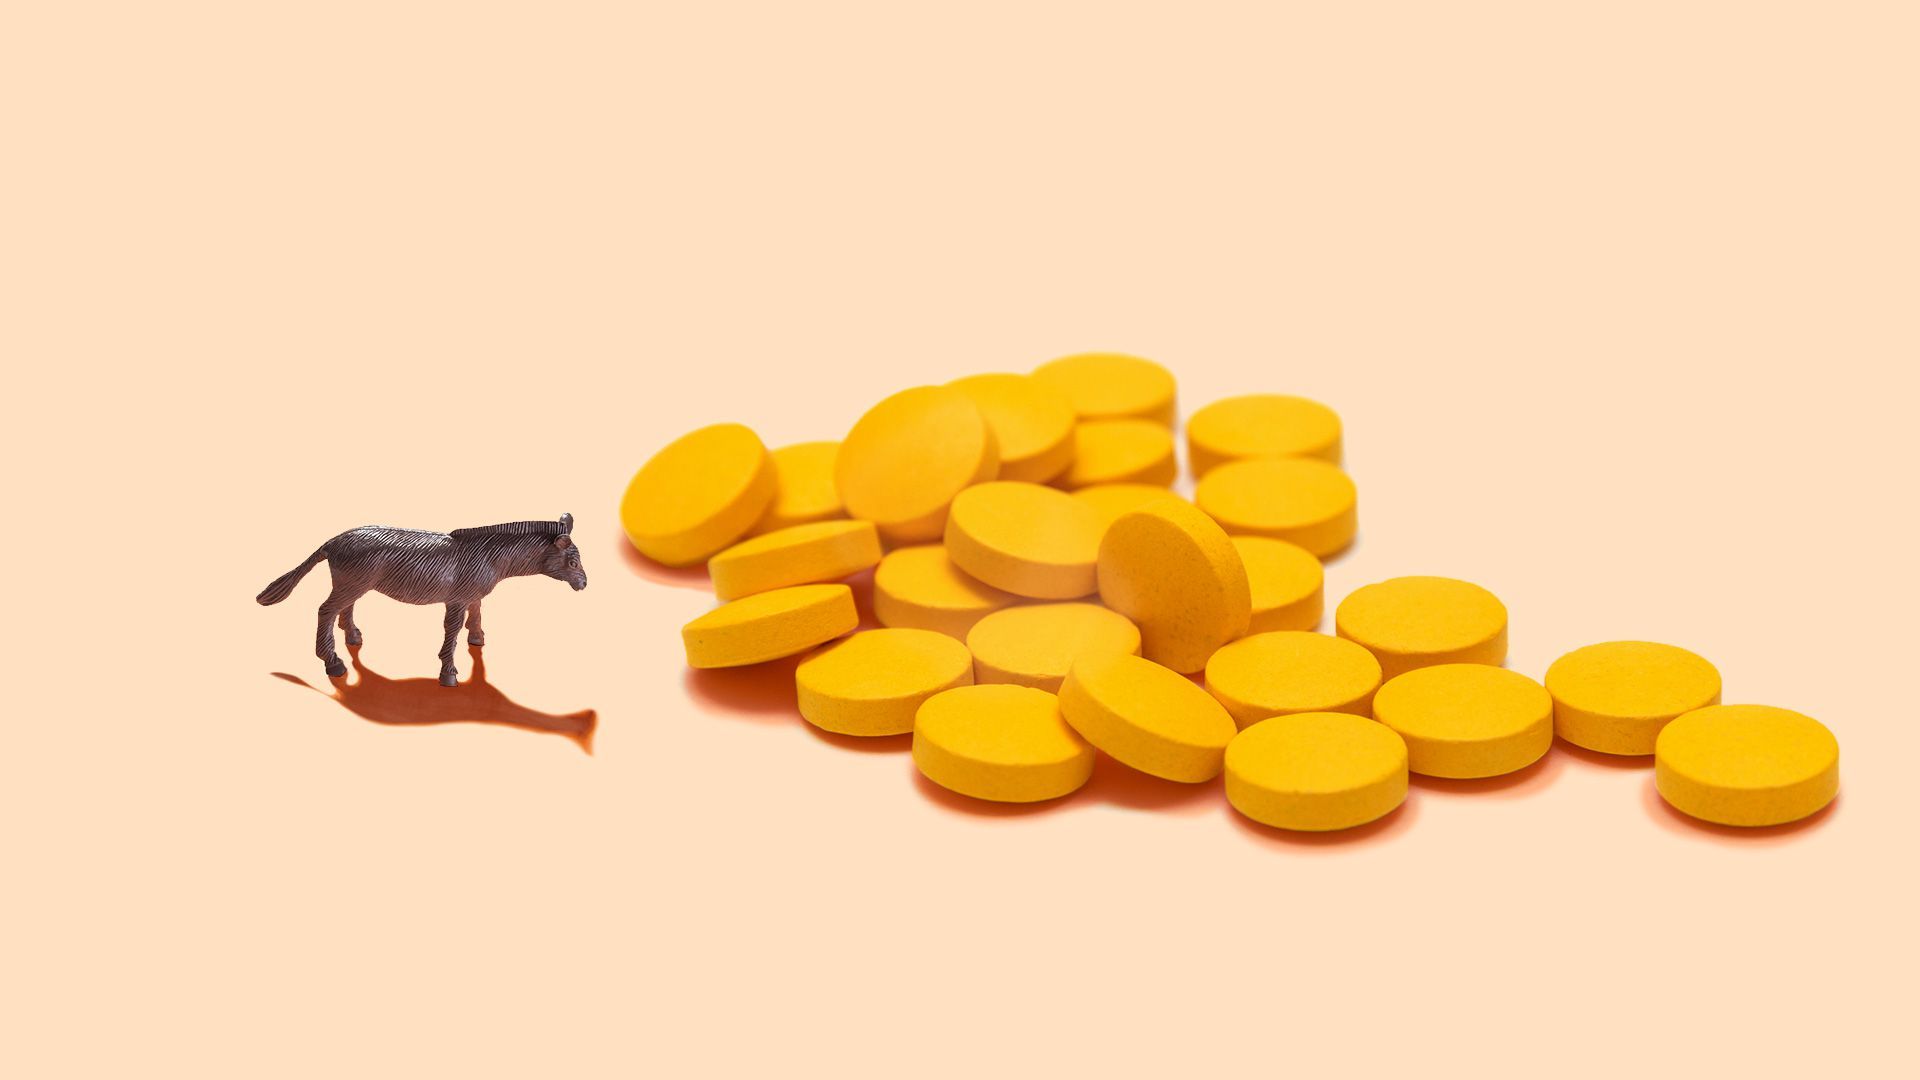 Illustration of a miniature toy donkey next to a large pile of pills